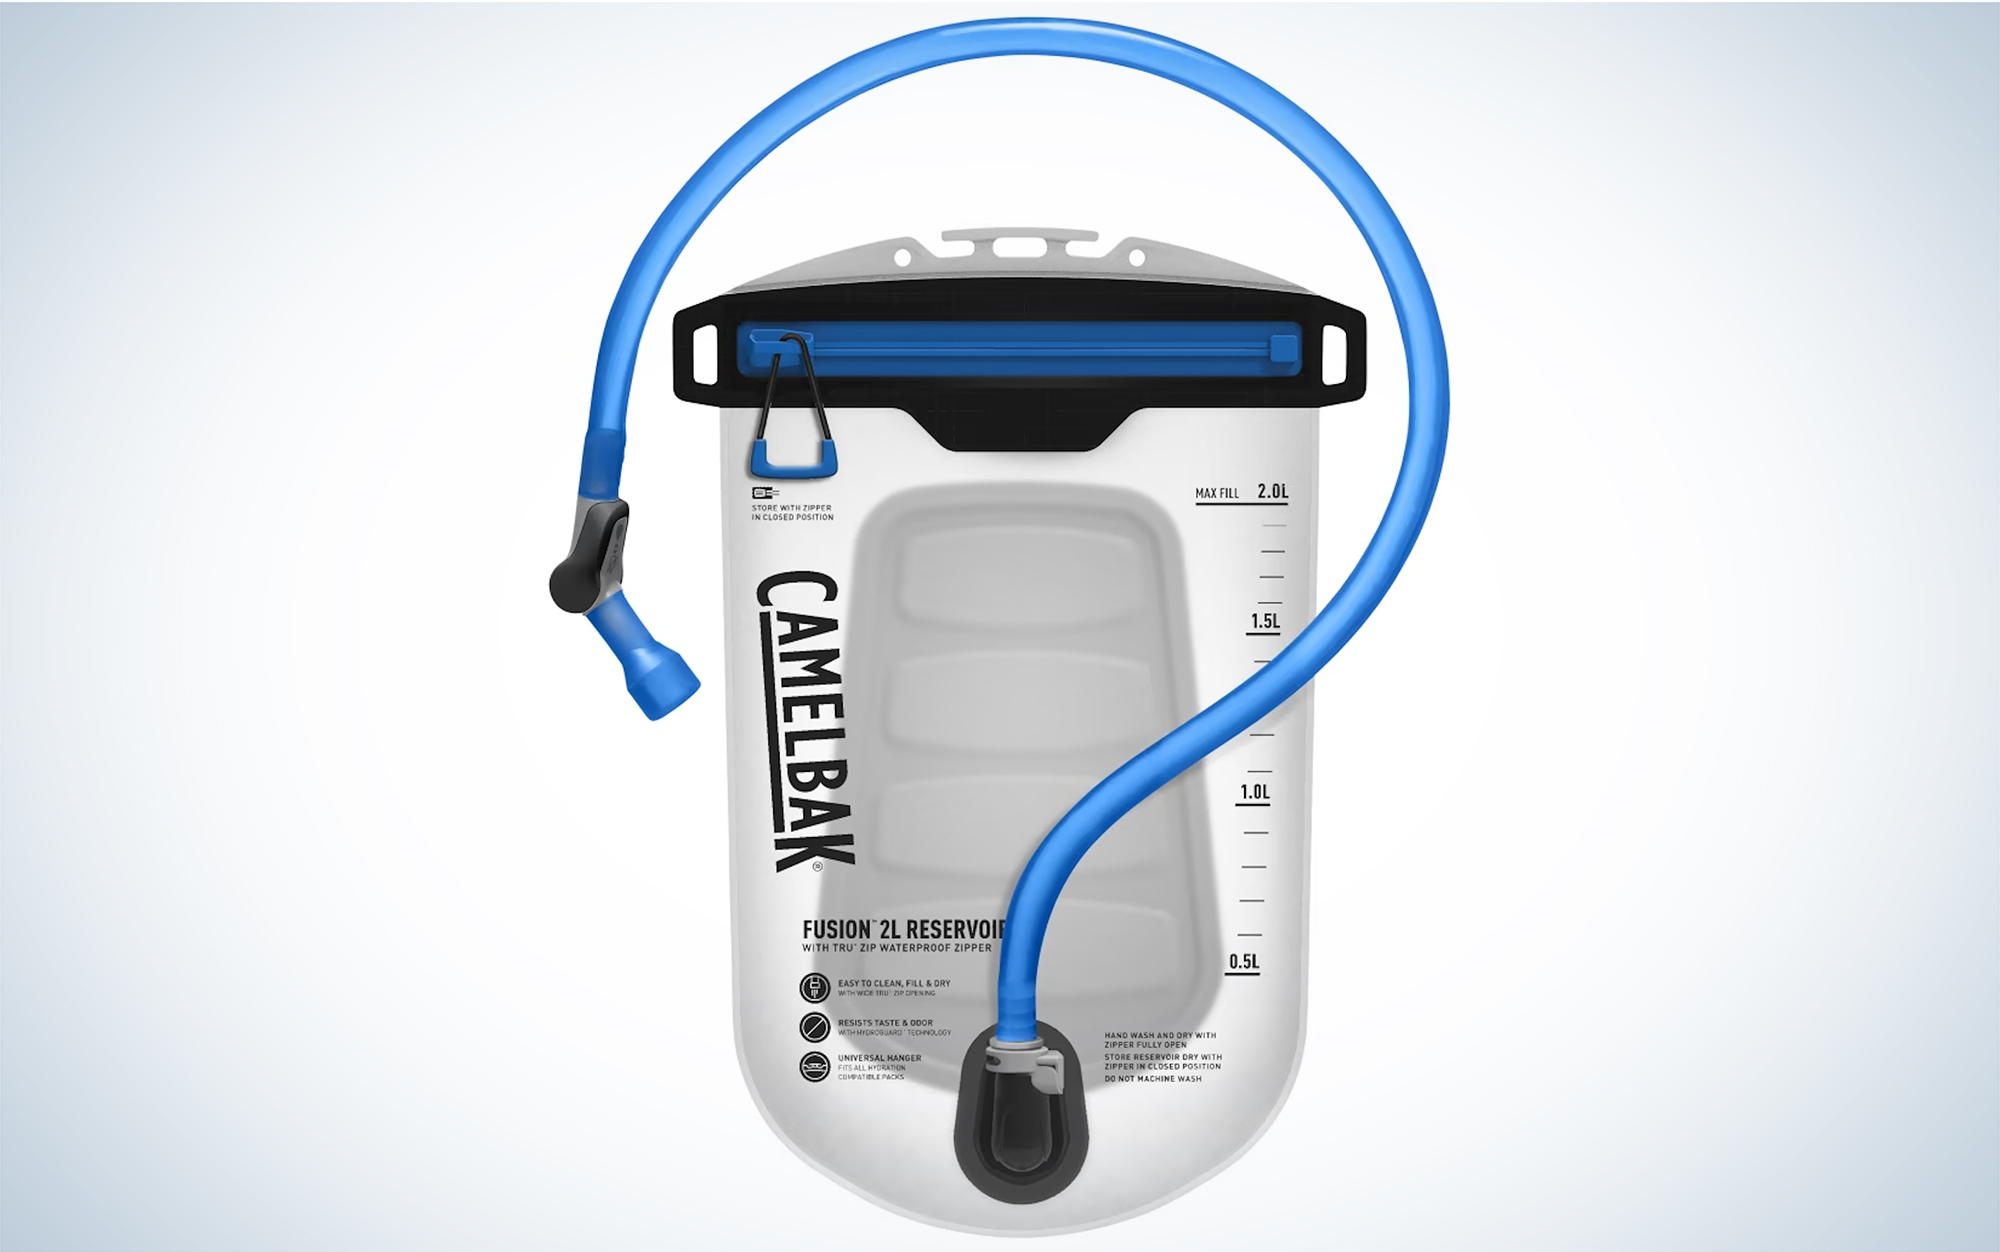 The CamelBak Fusion is the overall best hydration bladder.